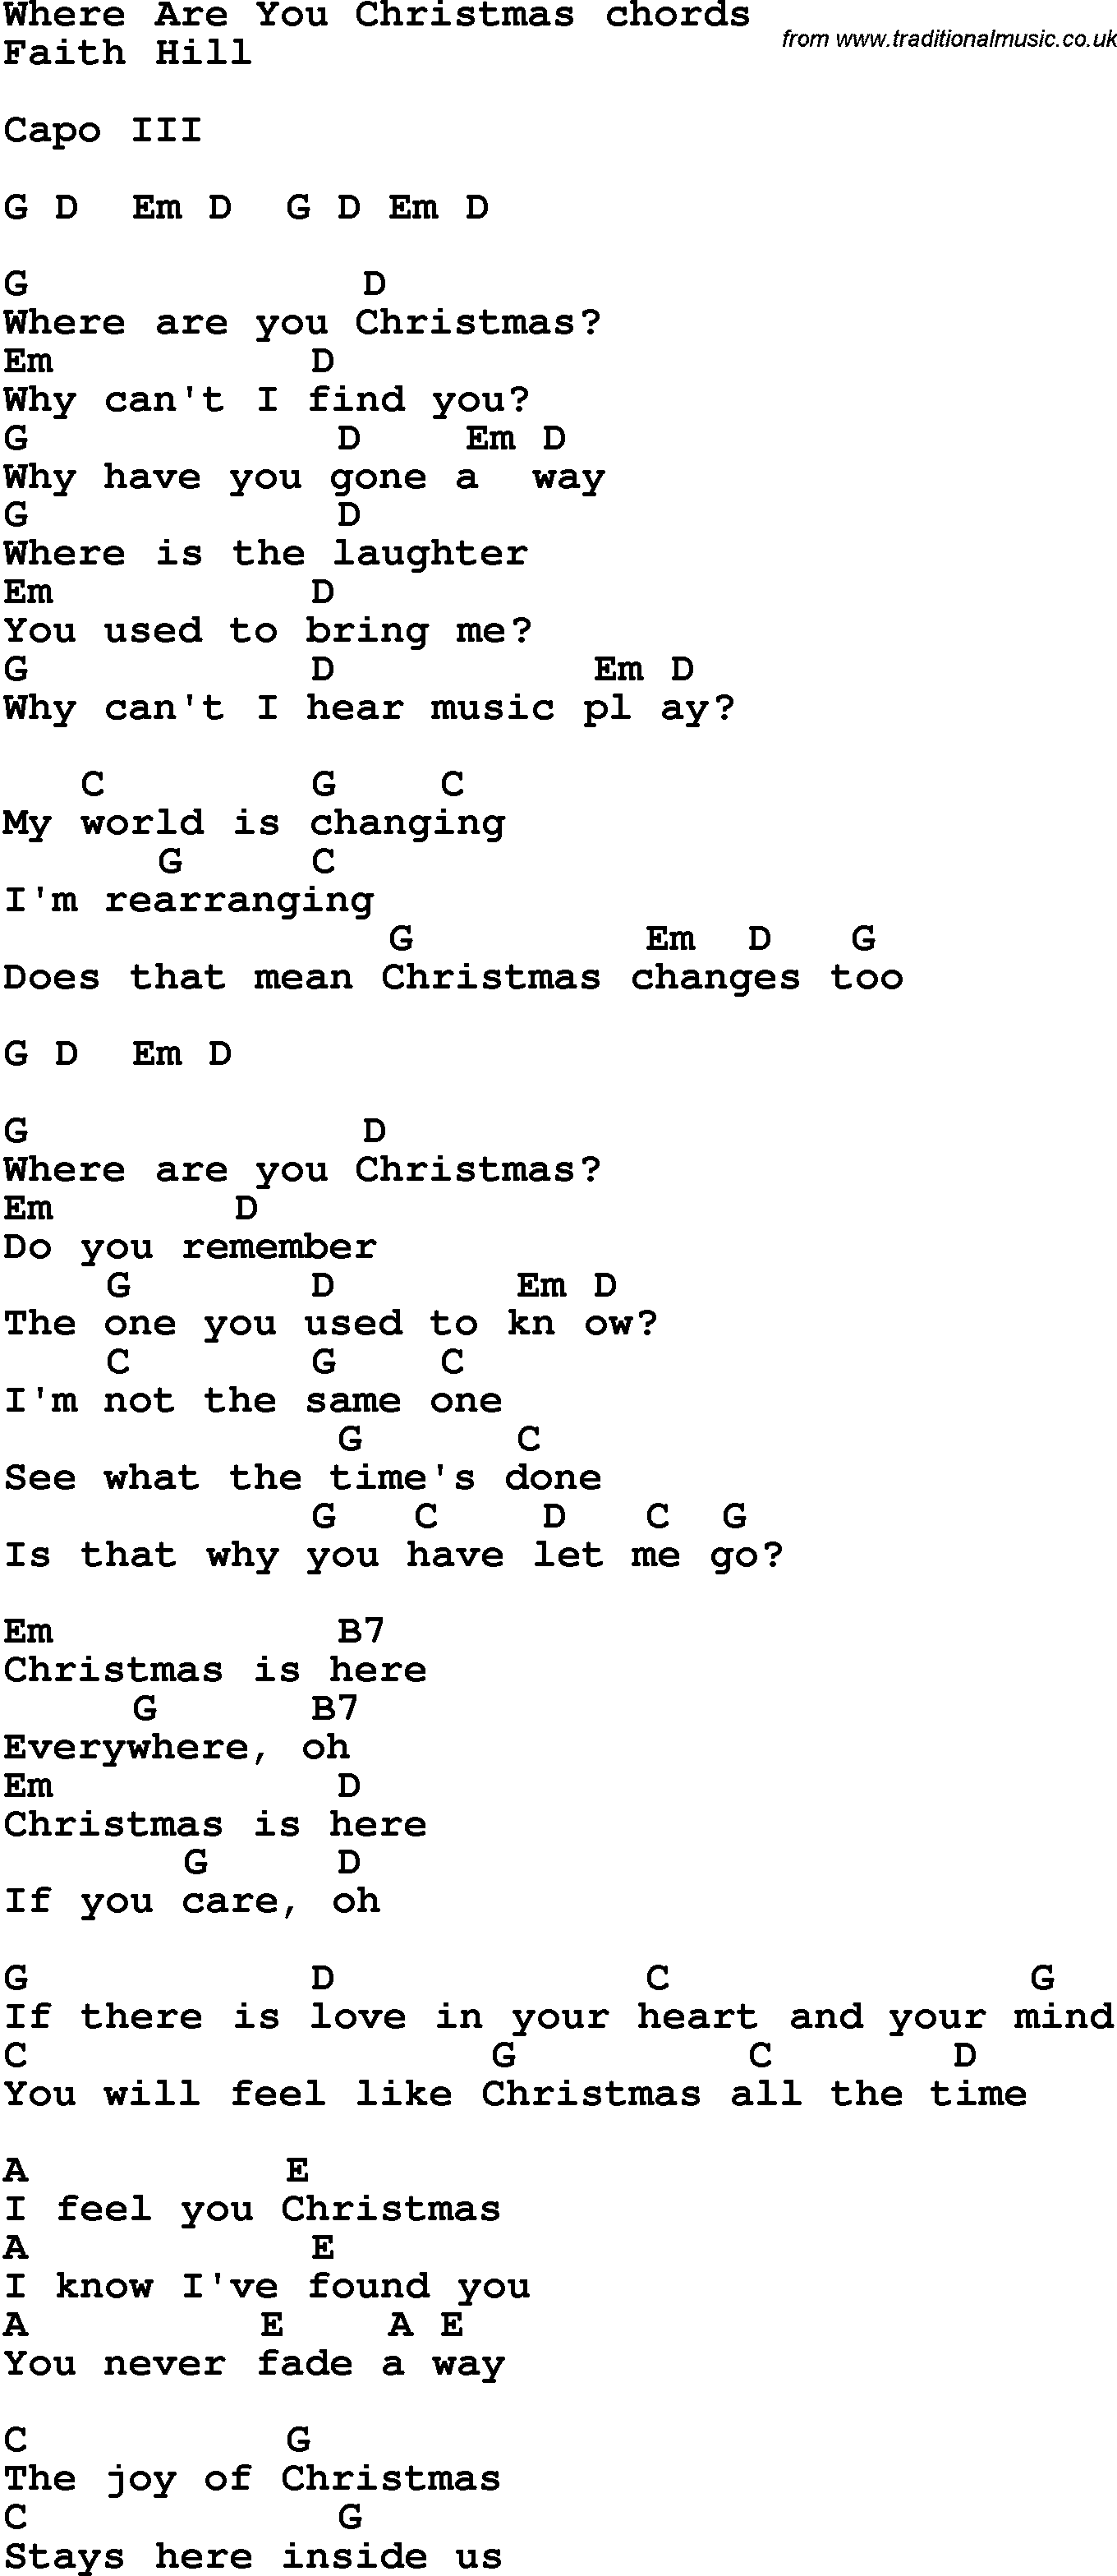 Song Lyrics with guitar chords for Where Are You Christmas